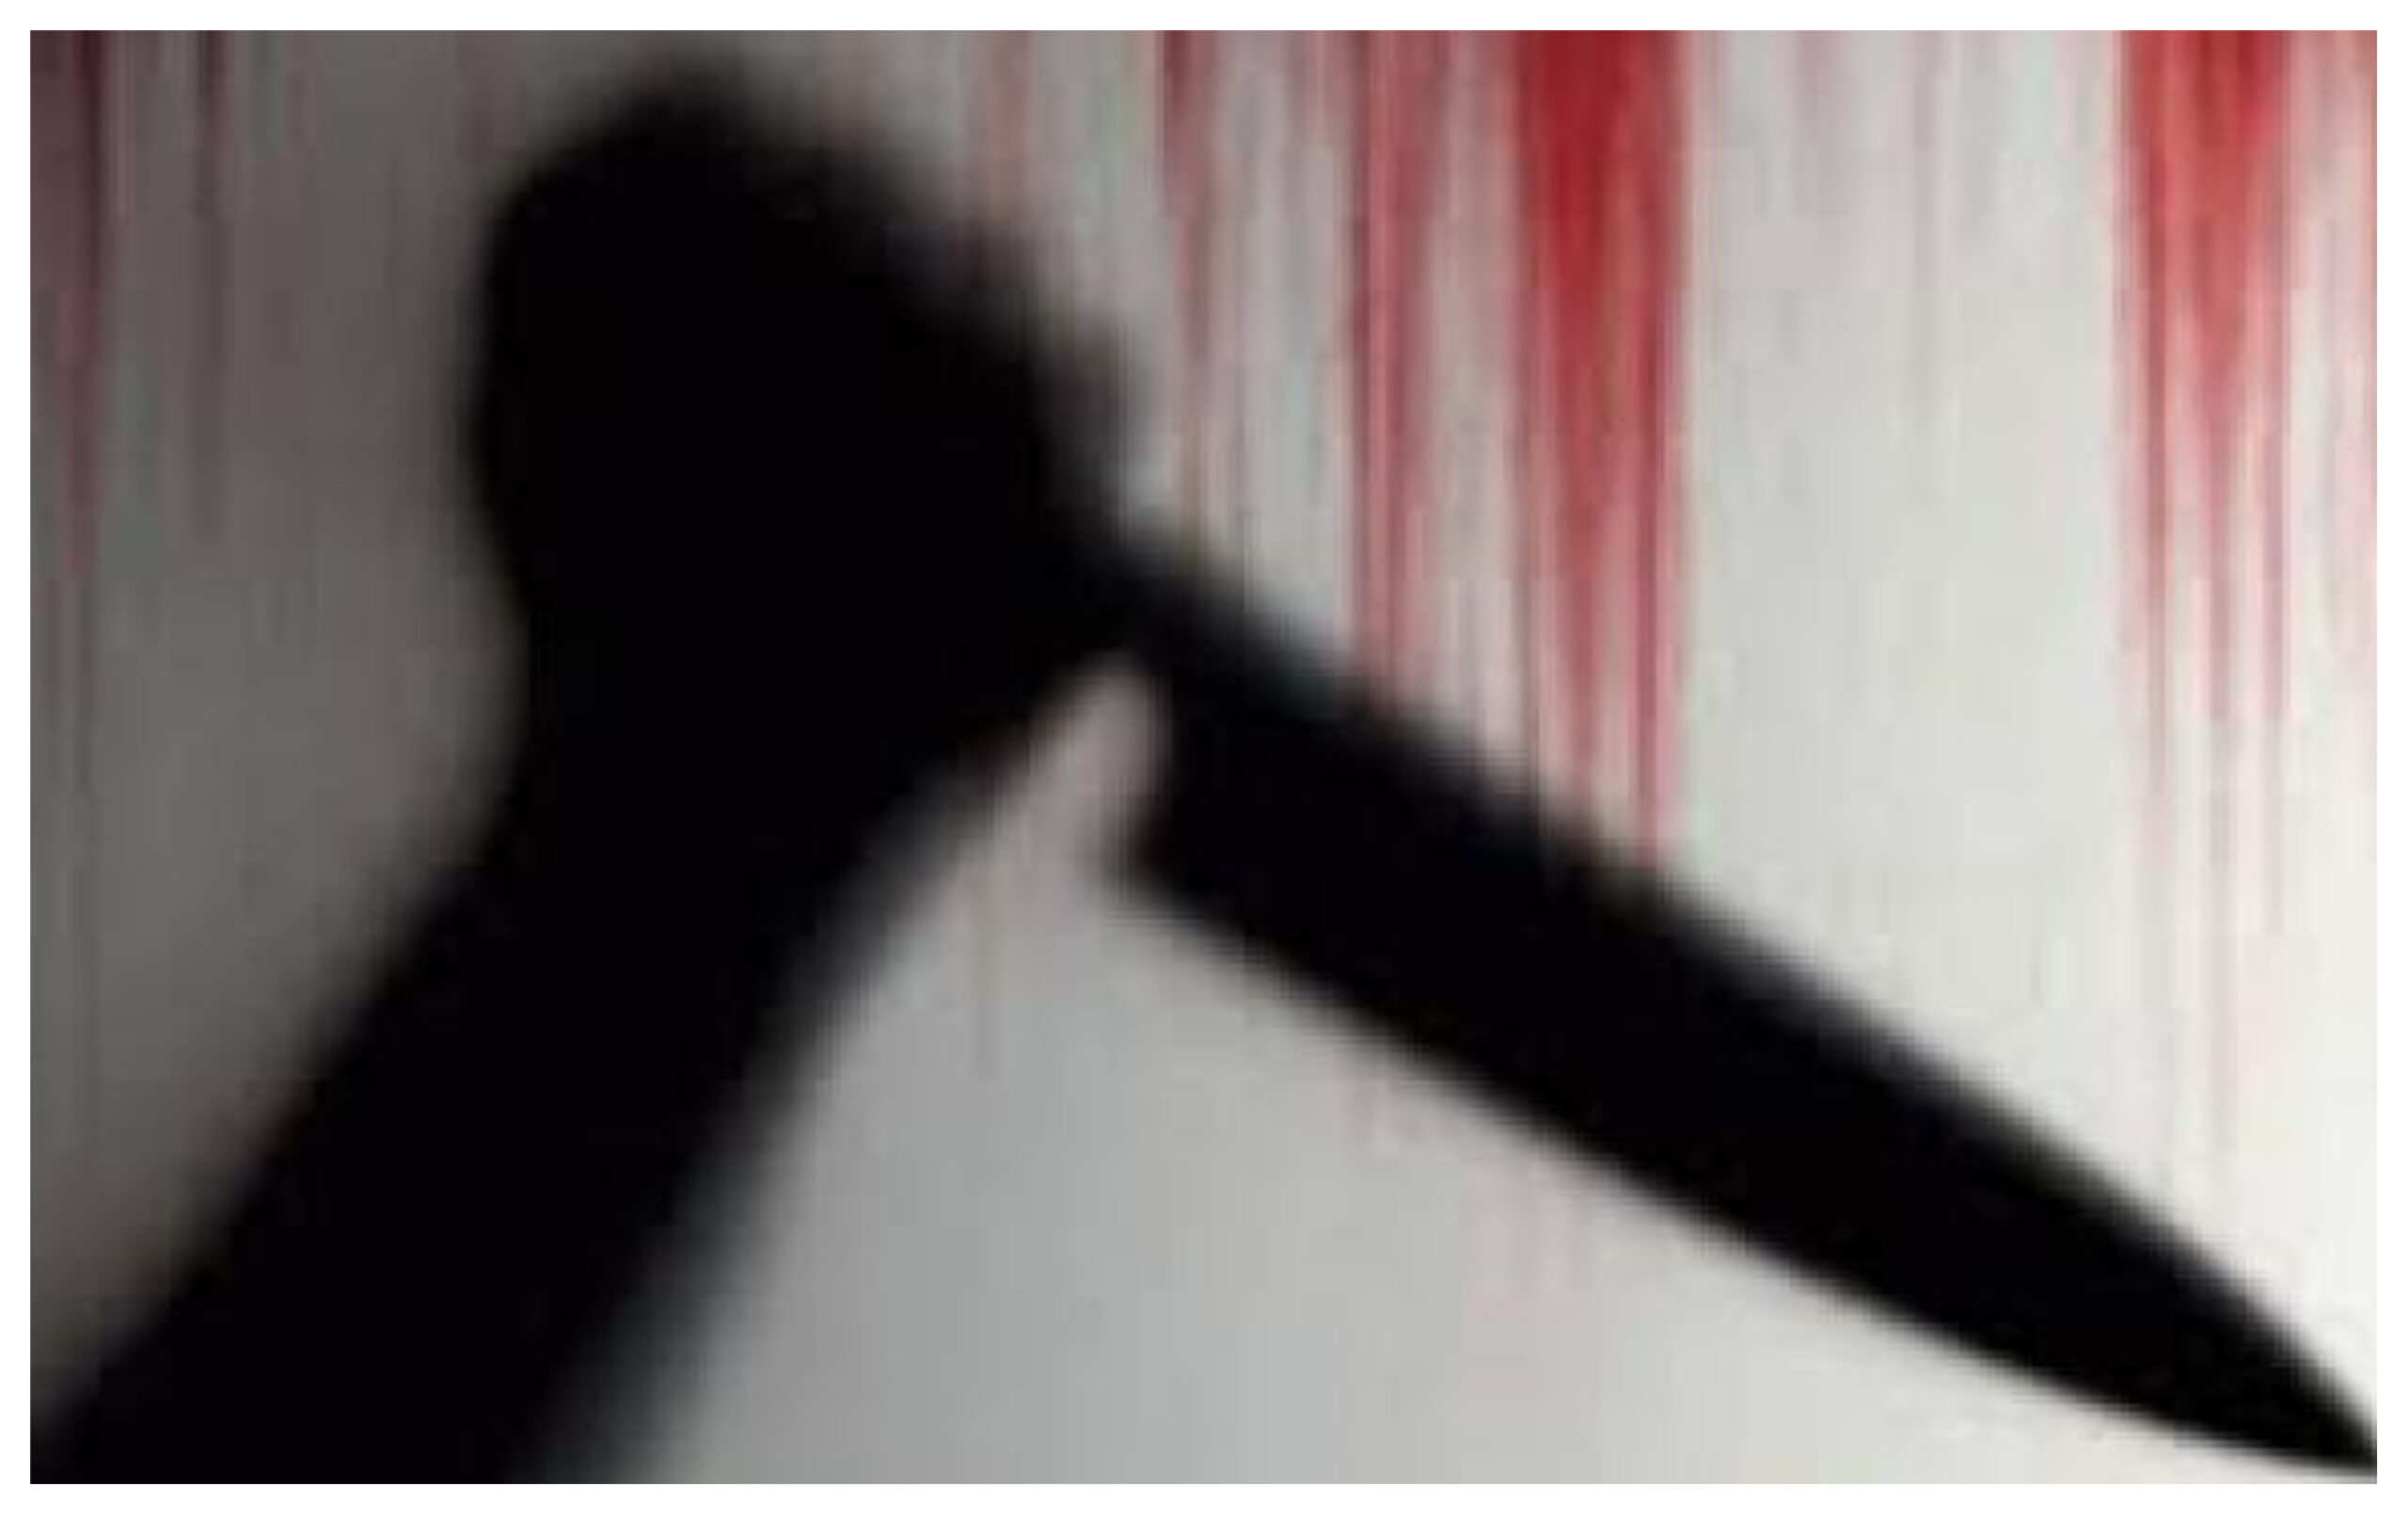 Karnataka: Woman stabbed to death in Hubli, suspicion of refusing love proposal, #Crime, #murders, #MurderCase, #karnataka, #hubli,Karnataka, Hubli, crime, murder, totaltv live, total news in hindi